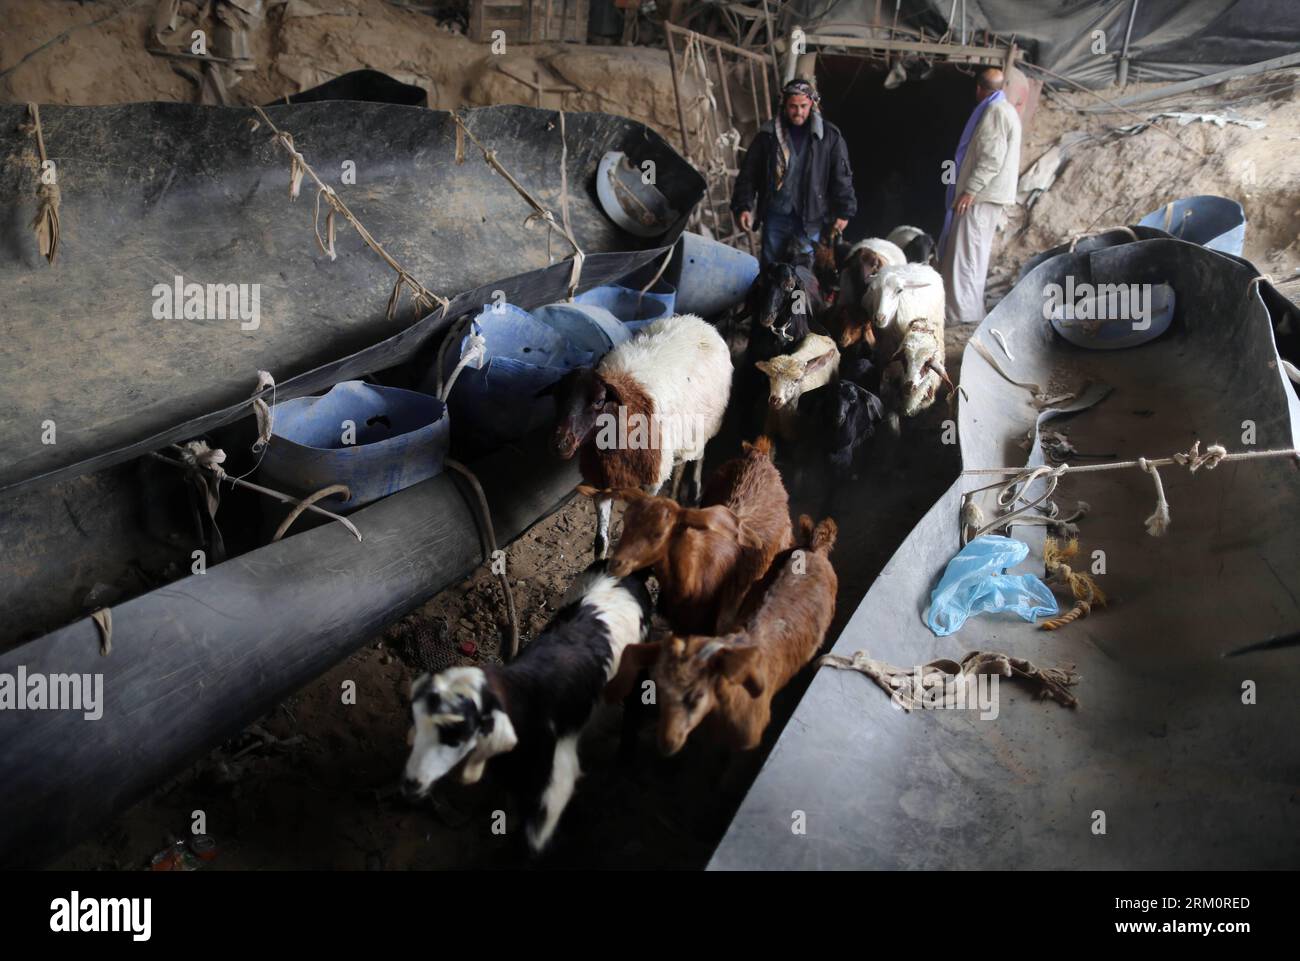 Bildnummer: 59466526  Datum: 02.04.2013  Copyright: imago/Xinhua (130402) -- GAZA, April 2, 2013 (Xinhua) -- Palestinian drive sheep through a smuggling tunnel between the Hamas-ruled Gaza Strip and Egypt in the southern Gaza Strip city of Rafah on April 2, 2013. The Egyptian army started to knock down Gaza smuggling tunnels last month after a high Egyptian court has urged the authorities in Cairo to tear down all the tunnels along the borders between Gaza and Egypt. (Xinhua/Wissam Nassar) (djj) MIDEAST-GAZA-SMUGGLING-TUNNELS PUBLICATIONxNOTxINxCHN Gesellschaft Gaza Gazastreifen Palästina Schm Stock Photo